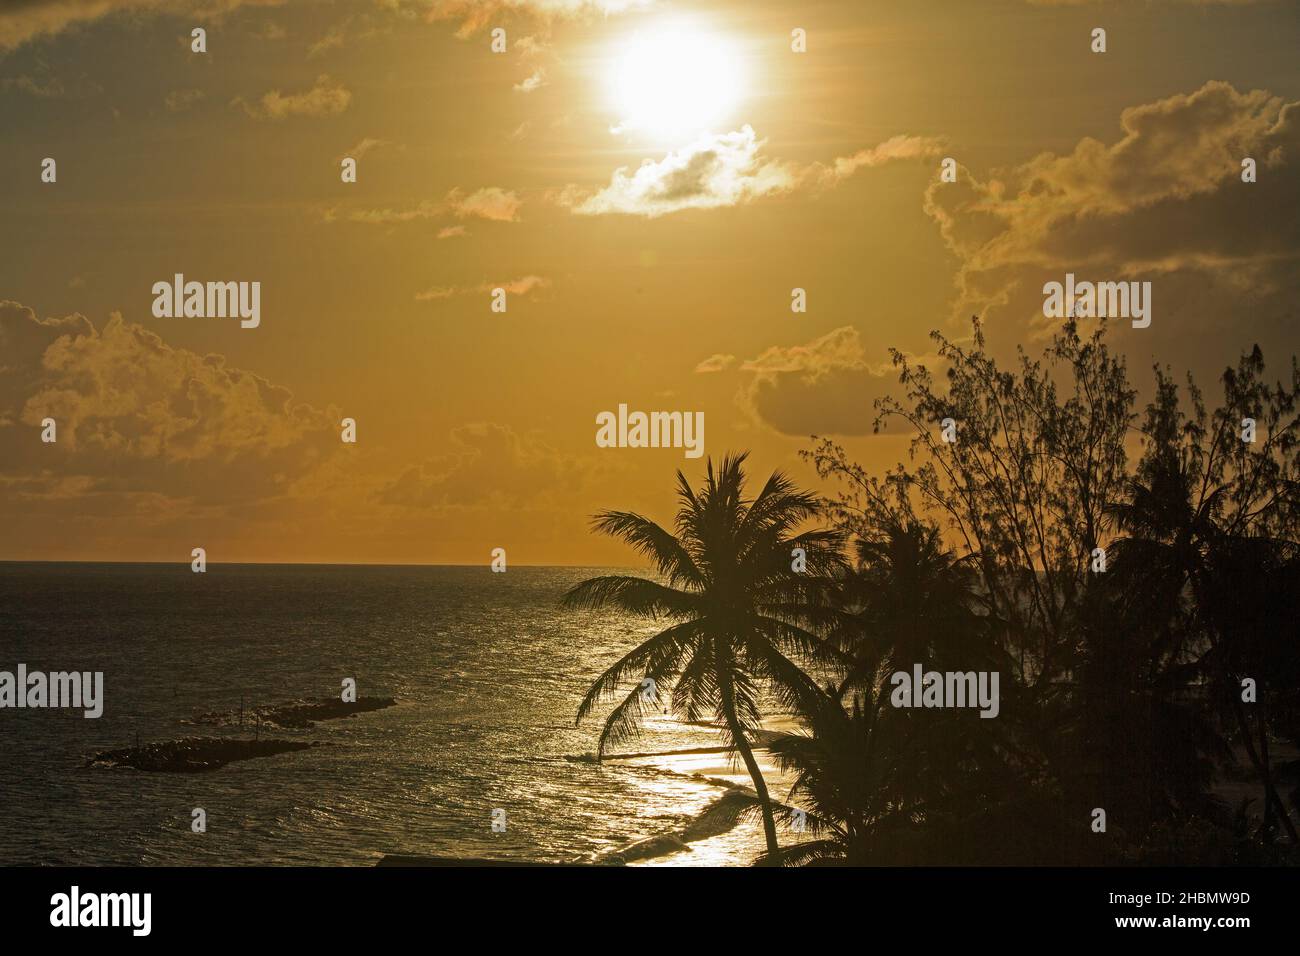 Caribbean Sunset in Barbados, with a silhouette of a palm tree and orange sky Stock Photo